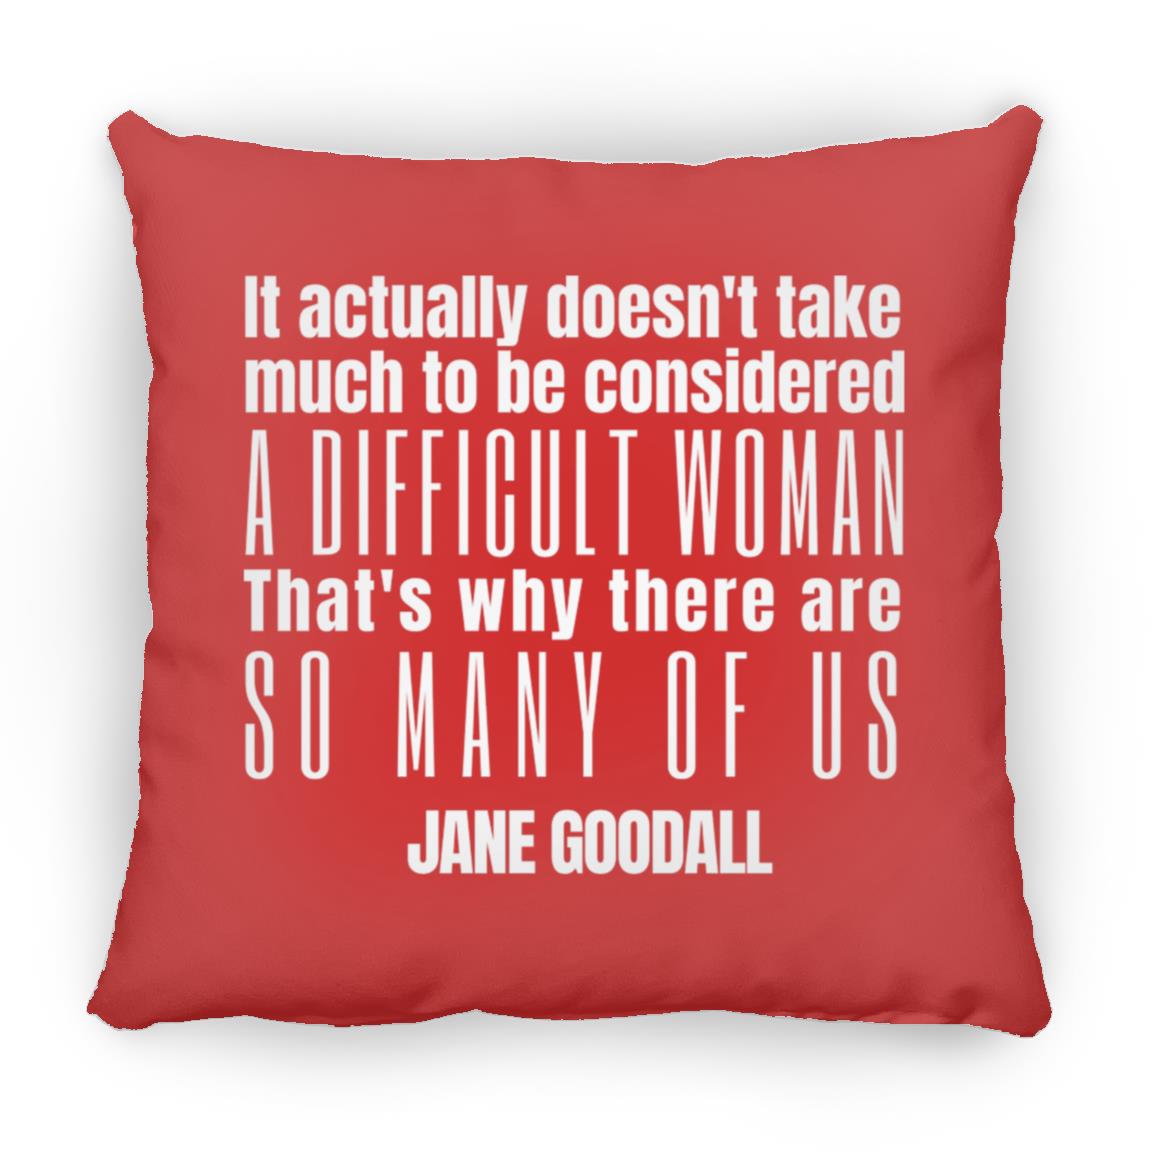 Jane Goodall Difficult Woman Quote Throw Pillow